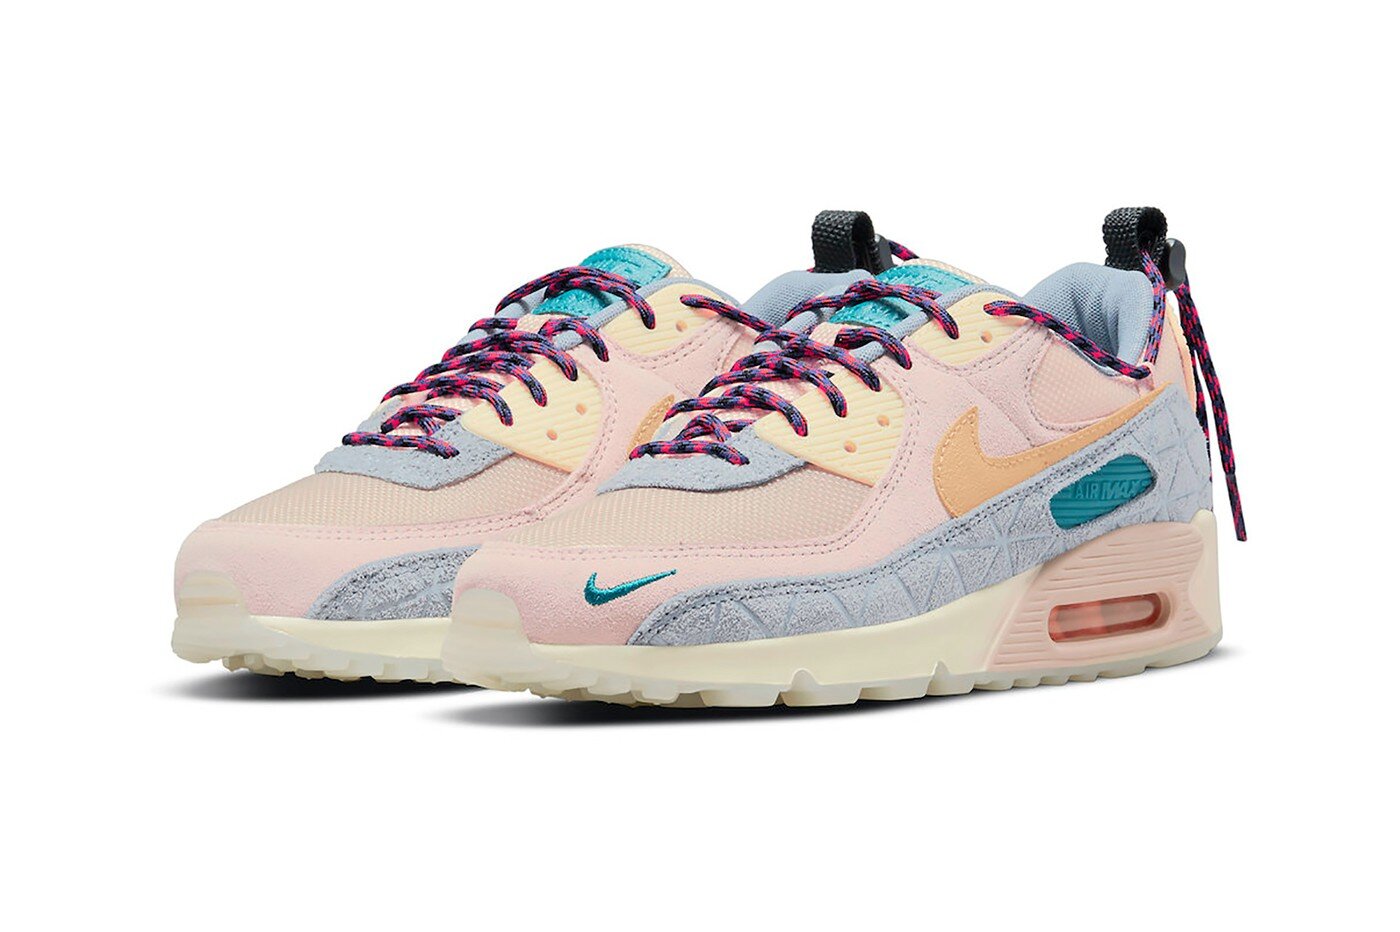 https---hypebeast.com-wp-content-blogs.dir-6-files-2021-07-nike-air-max-90-am90-womens-sneakers-fossil-stone-pastel-pink-blue-release-info-4.jpg